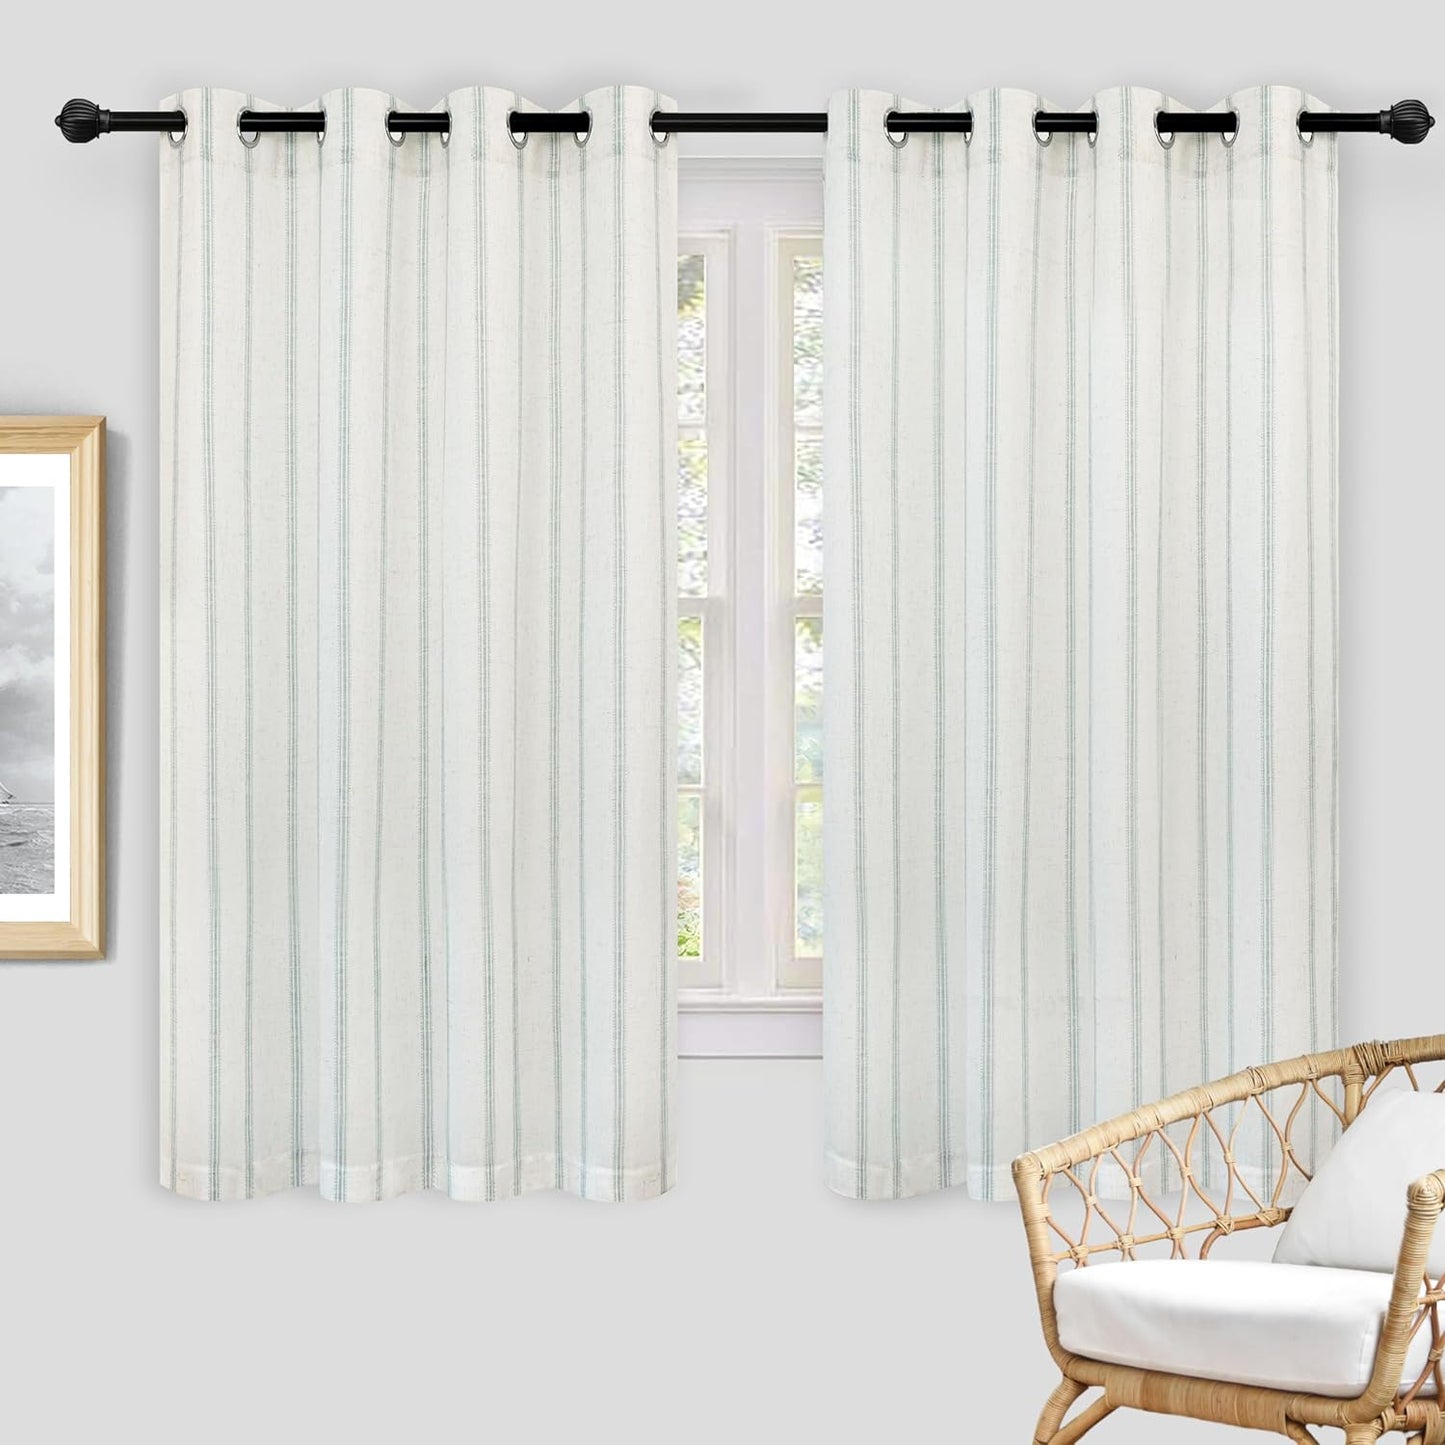 Driftaway Farmhouse Linen Blend Blackout Curtains 84 Inches Long for Bedroom Vertical Striped Printed Linen Curtains Thermal Insulated Grommet Lined Treatments for Living Room 2 Panels W52 X L84 Grey  DriftAway Light Jade Green 52"X63" 